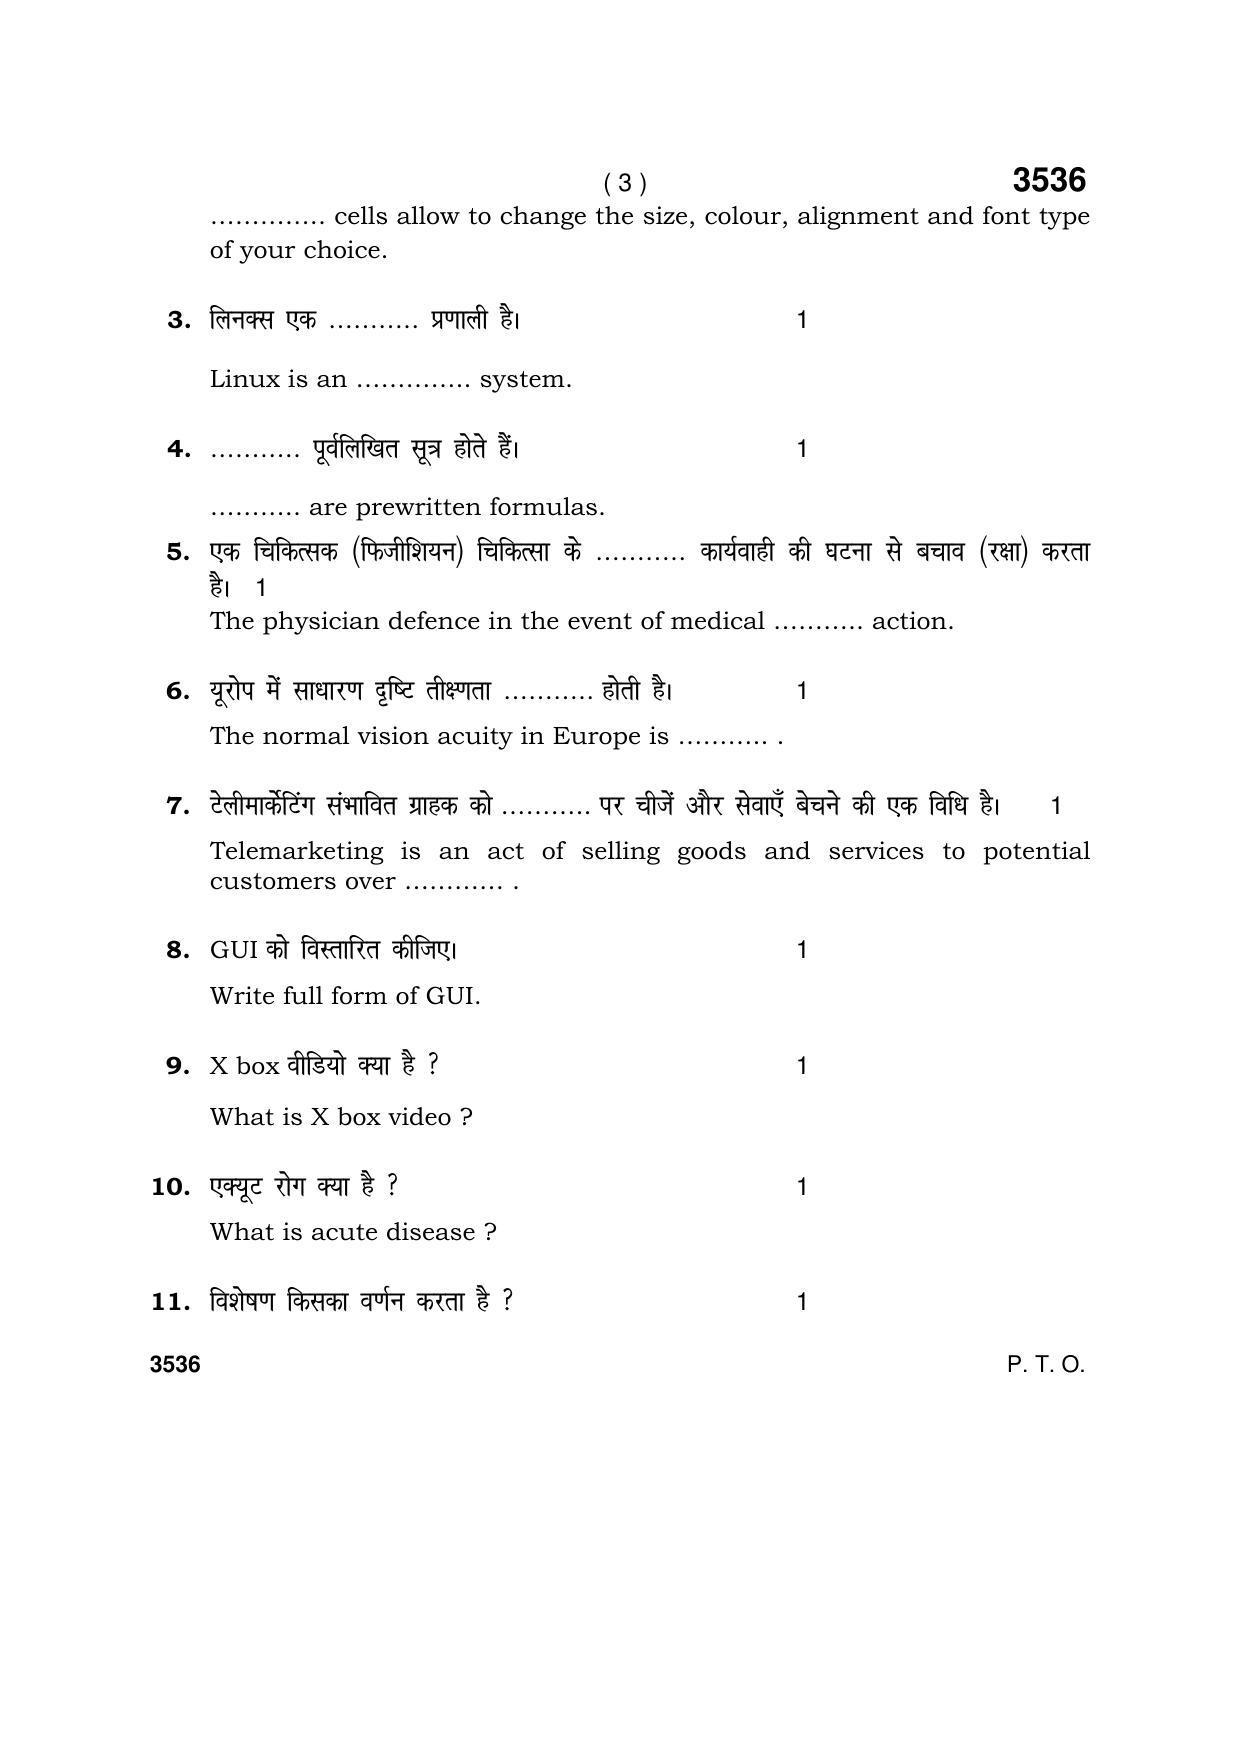 Haryana Board HBSE Class 10 Vision Technician 2018 Question Paper - Page 3